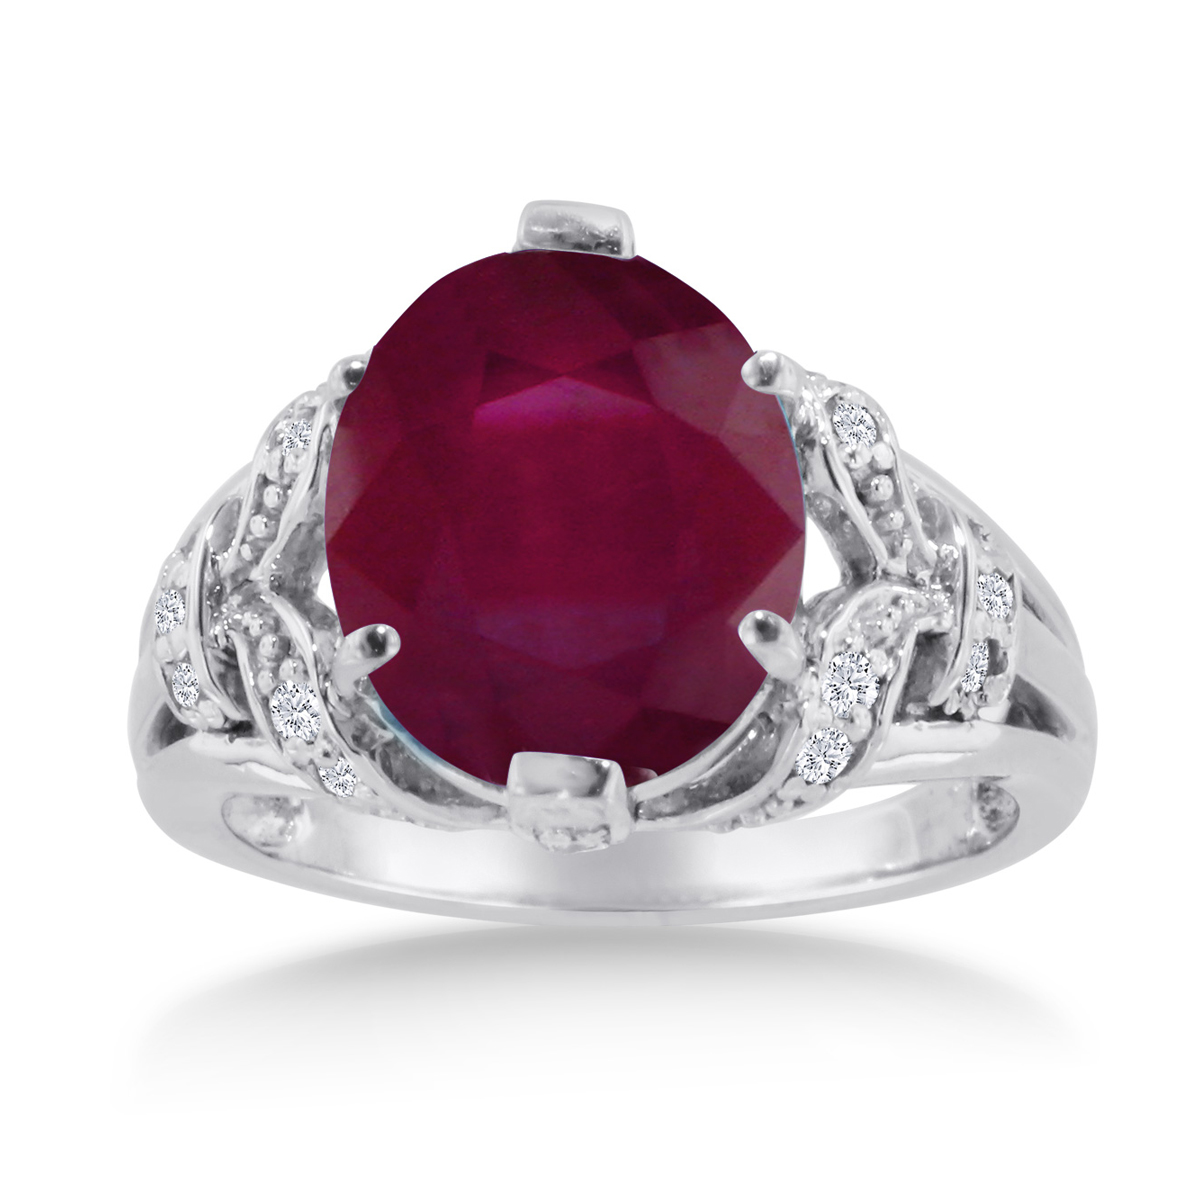 Details about   14k White Gold Oval Ruby And Diamond Ring 